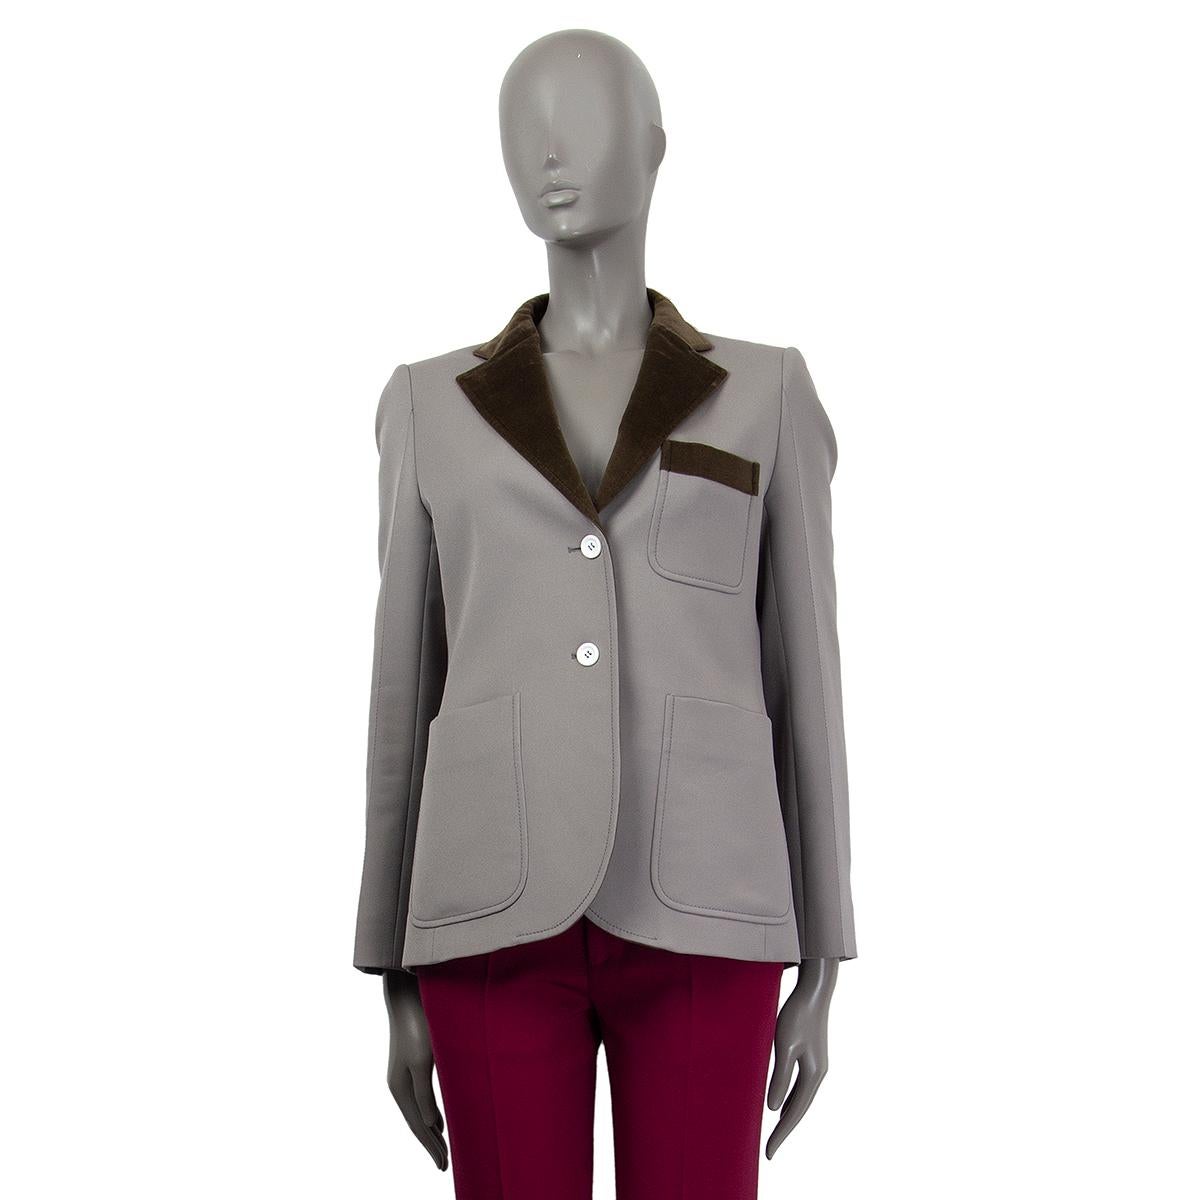 Louis Vuitton long-cut blazer in grey polyester with olive green velvet collar and check pocket trim. Has white buttons and three patch pockets. Lined in viscose (50%) and cupro (50%). Has been worn and is in excellent condition.

Tag Size 38
Size